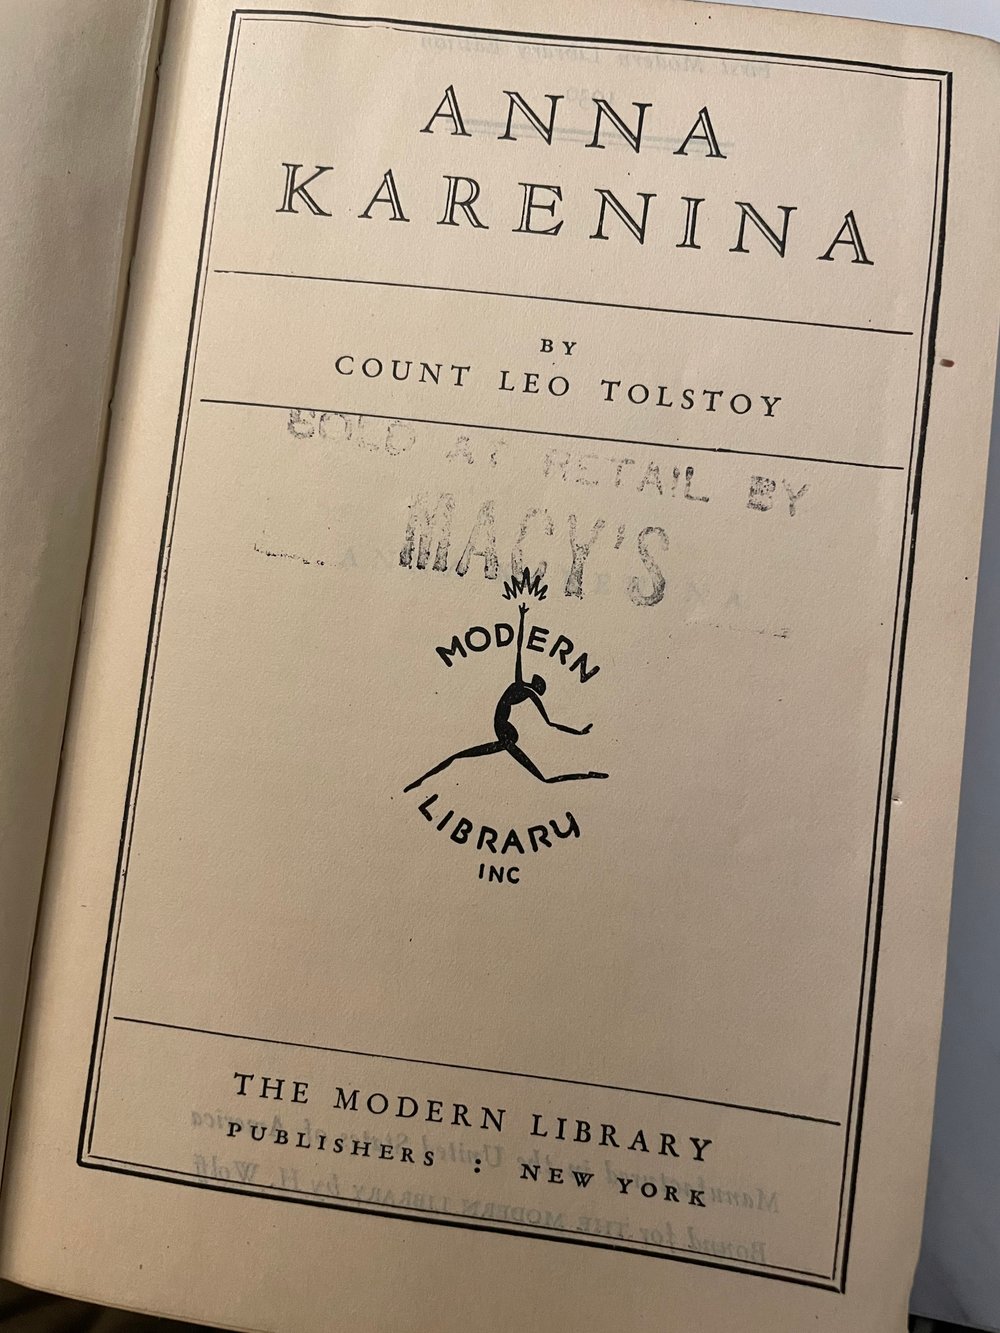 *EXTREMELY RARE* Anna Karenina by Leo Tolstoy First Edition 1930